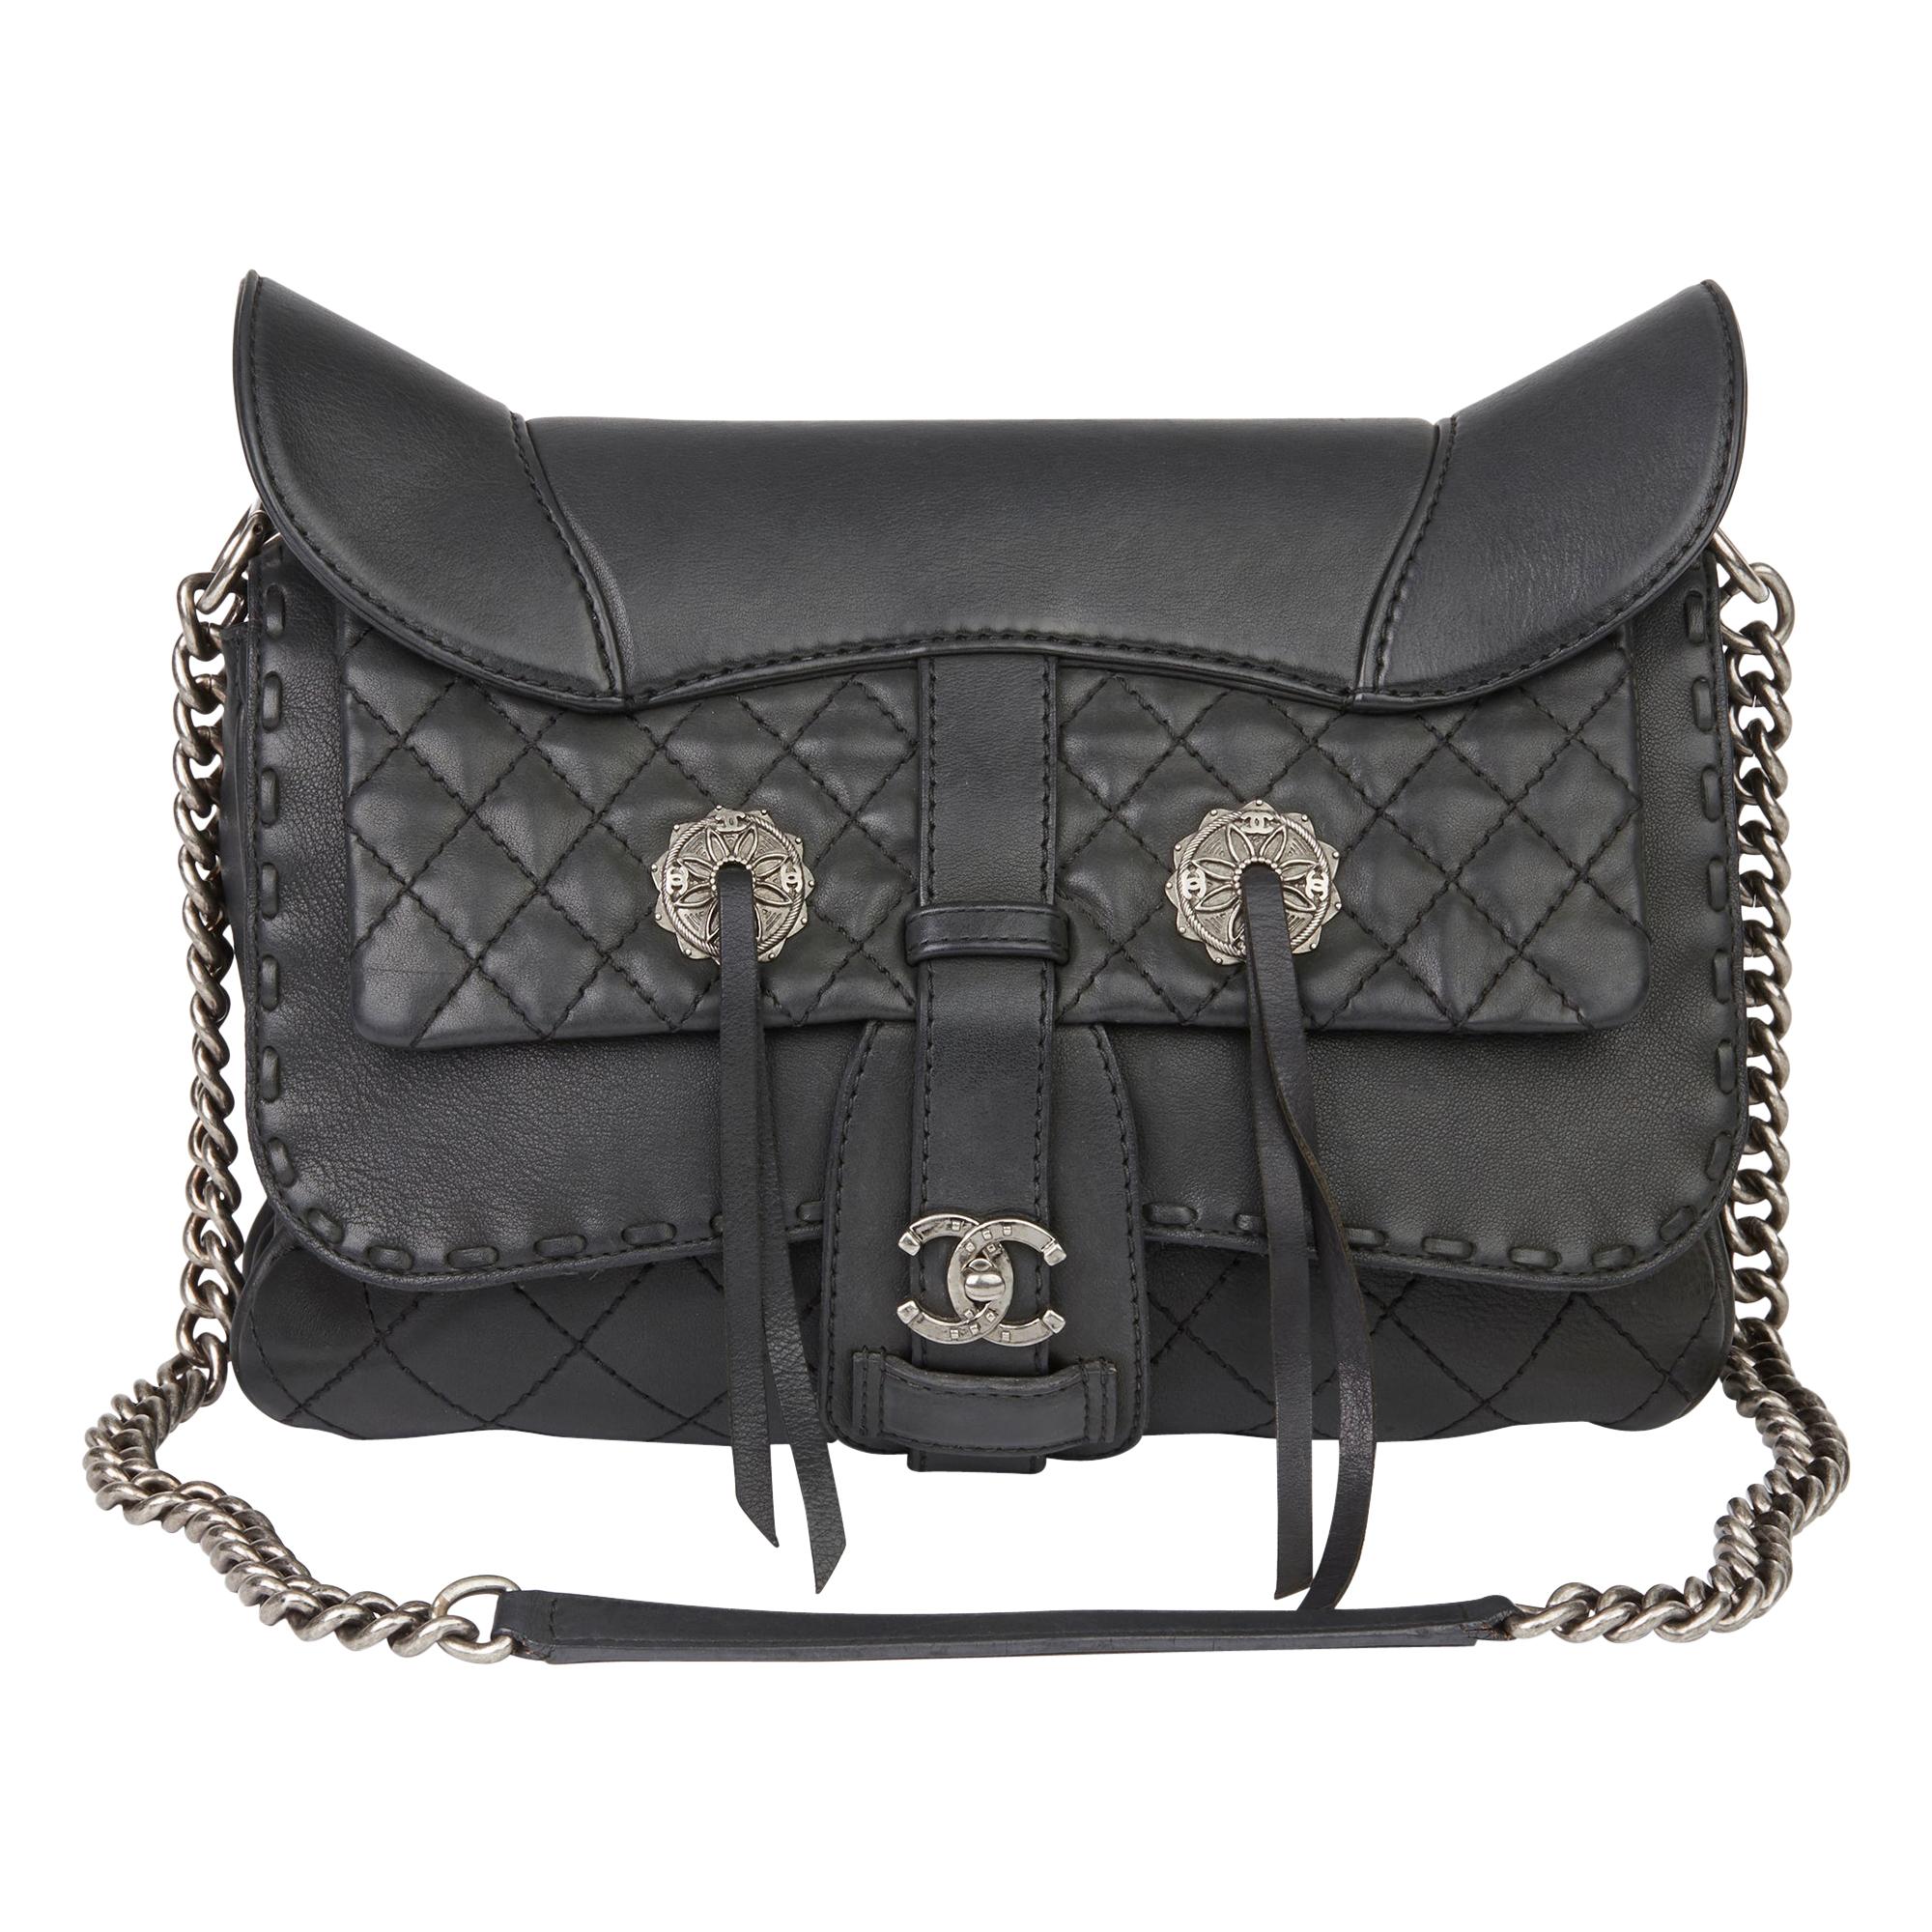 2014 Chanel Black Quilted Calfskin Leather Paris-Dallas Ride Western Saddle Bag